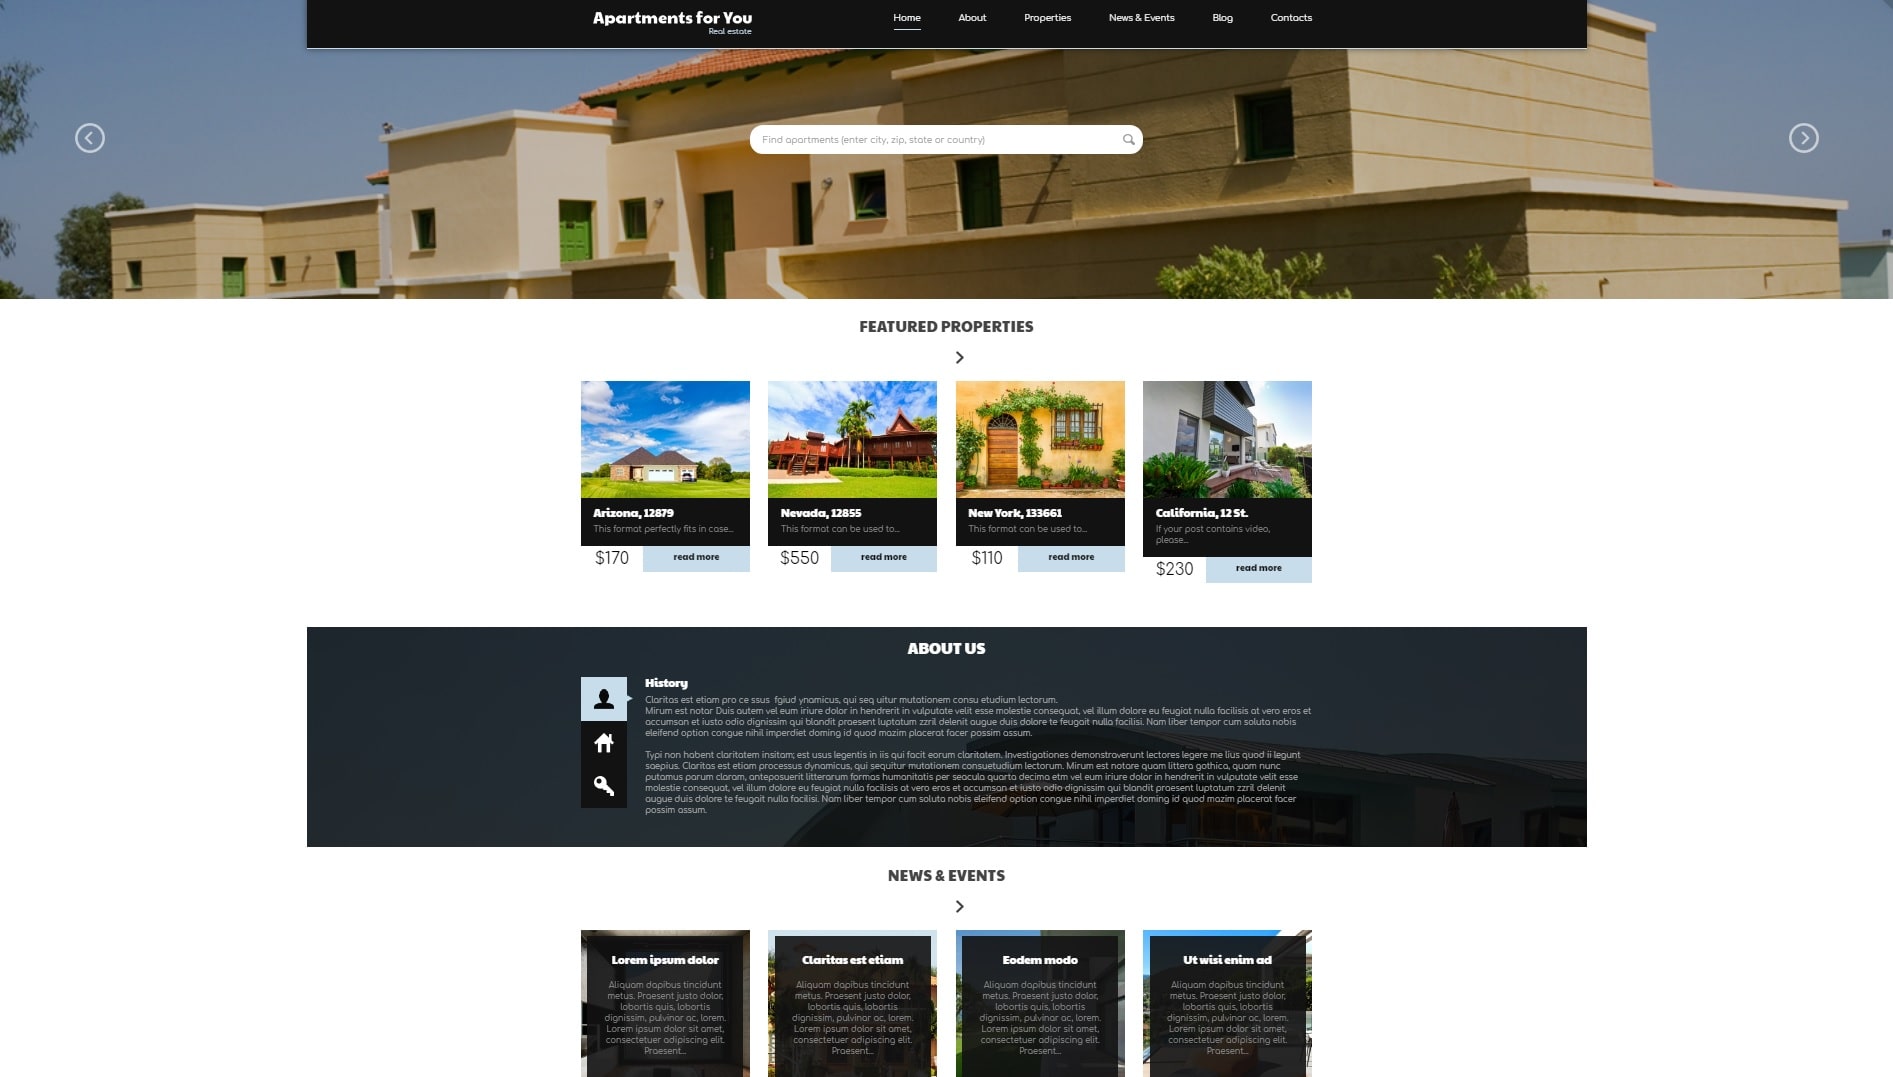 Rent Buy property WP real estate theme